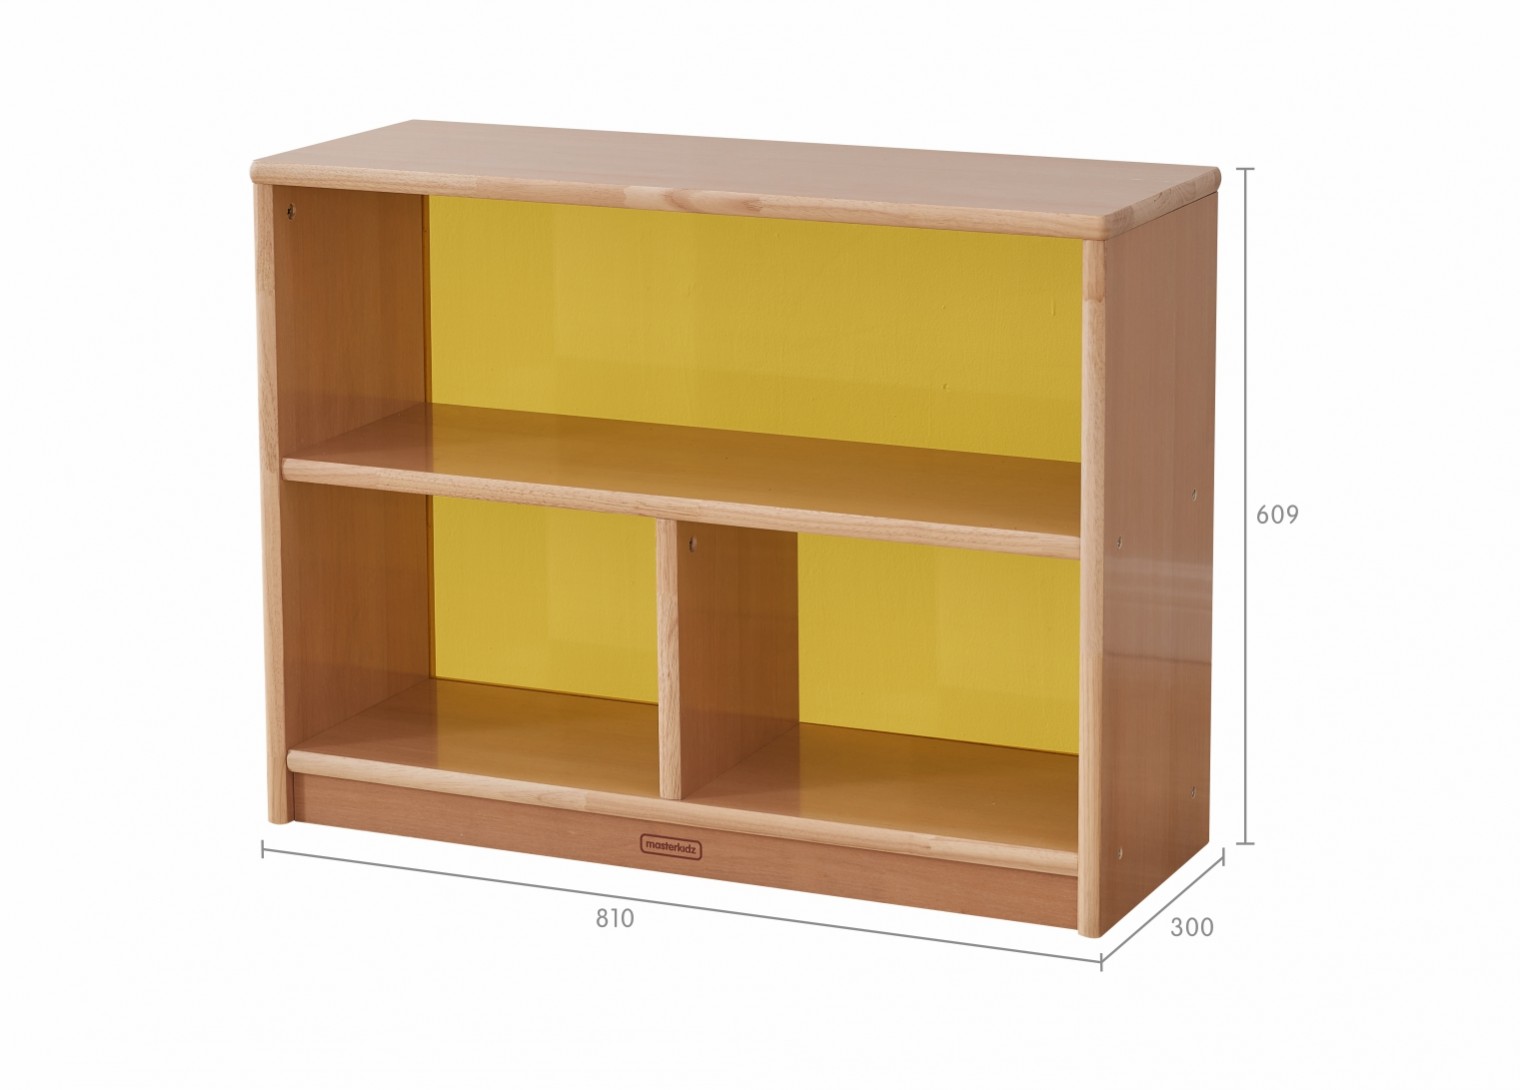 Forest School - 609H x 810L Wooden  3-Compartment Shelving Unit - Translucent Yellow Back